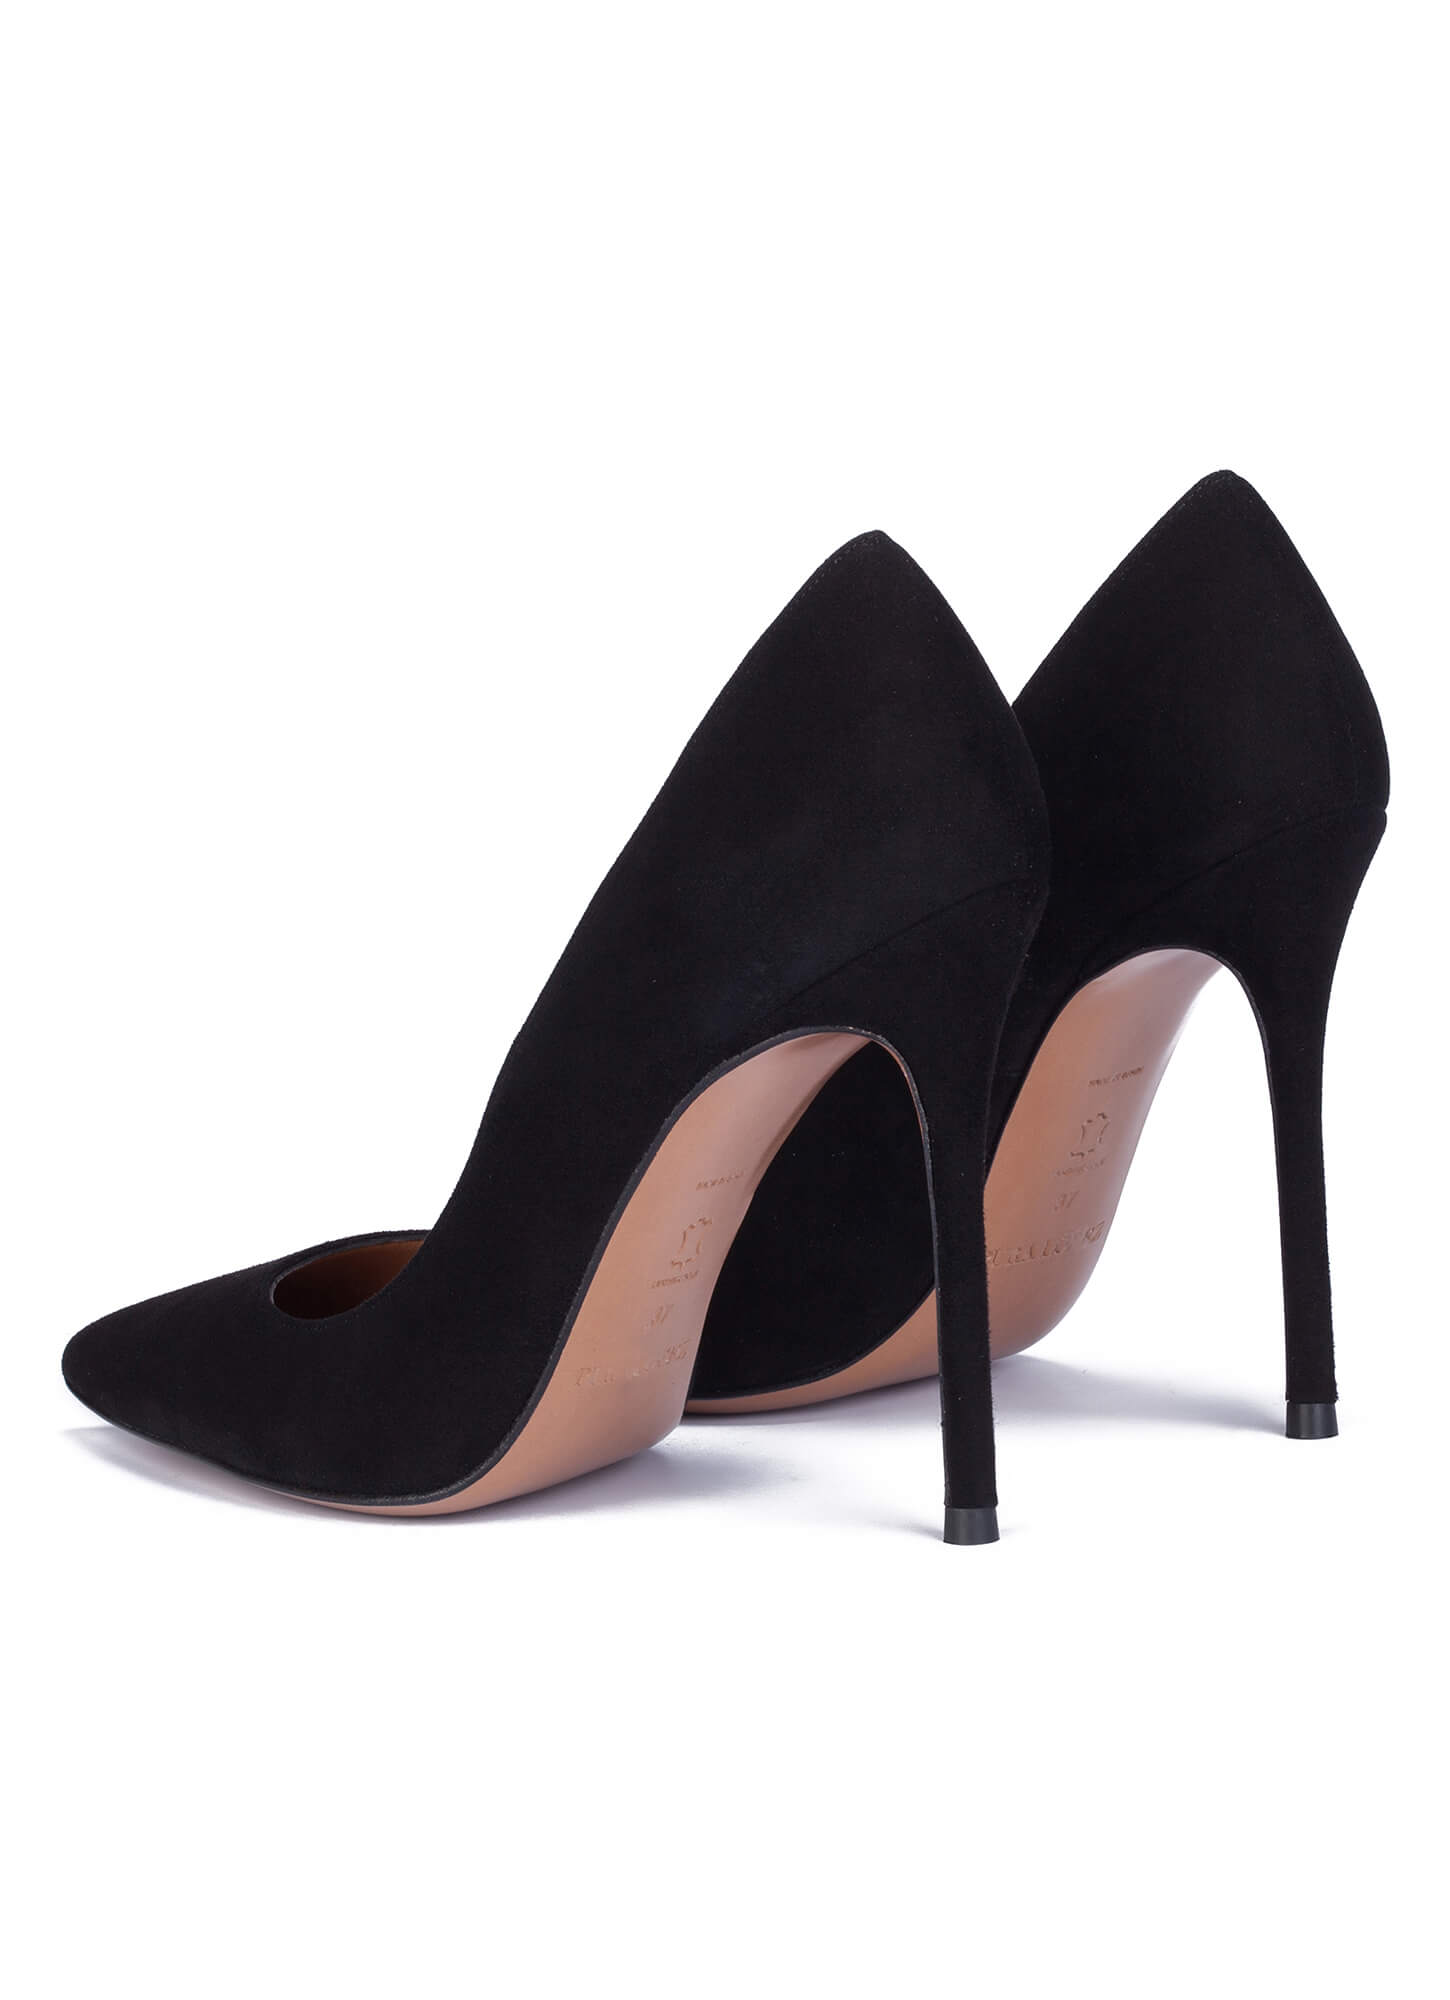 Where's That From Kyra Black Suede High Heel Pumps - Matalan